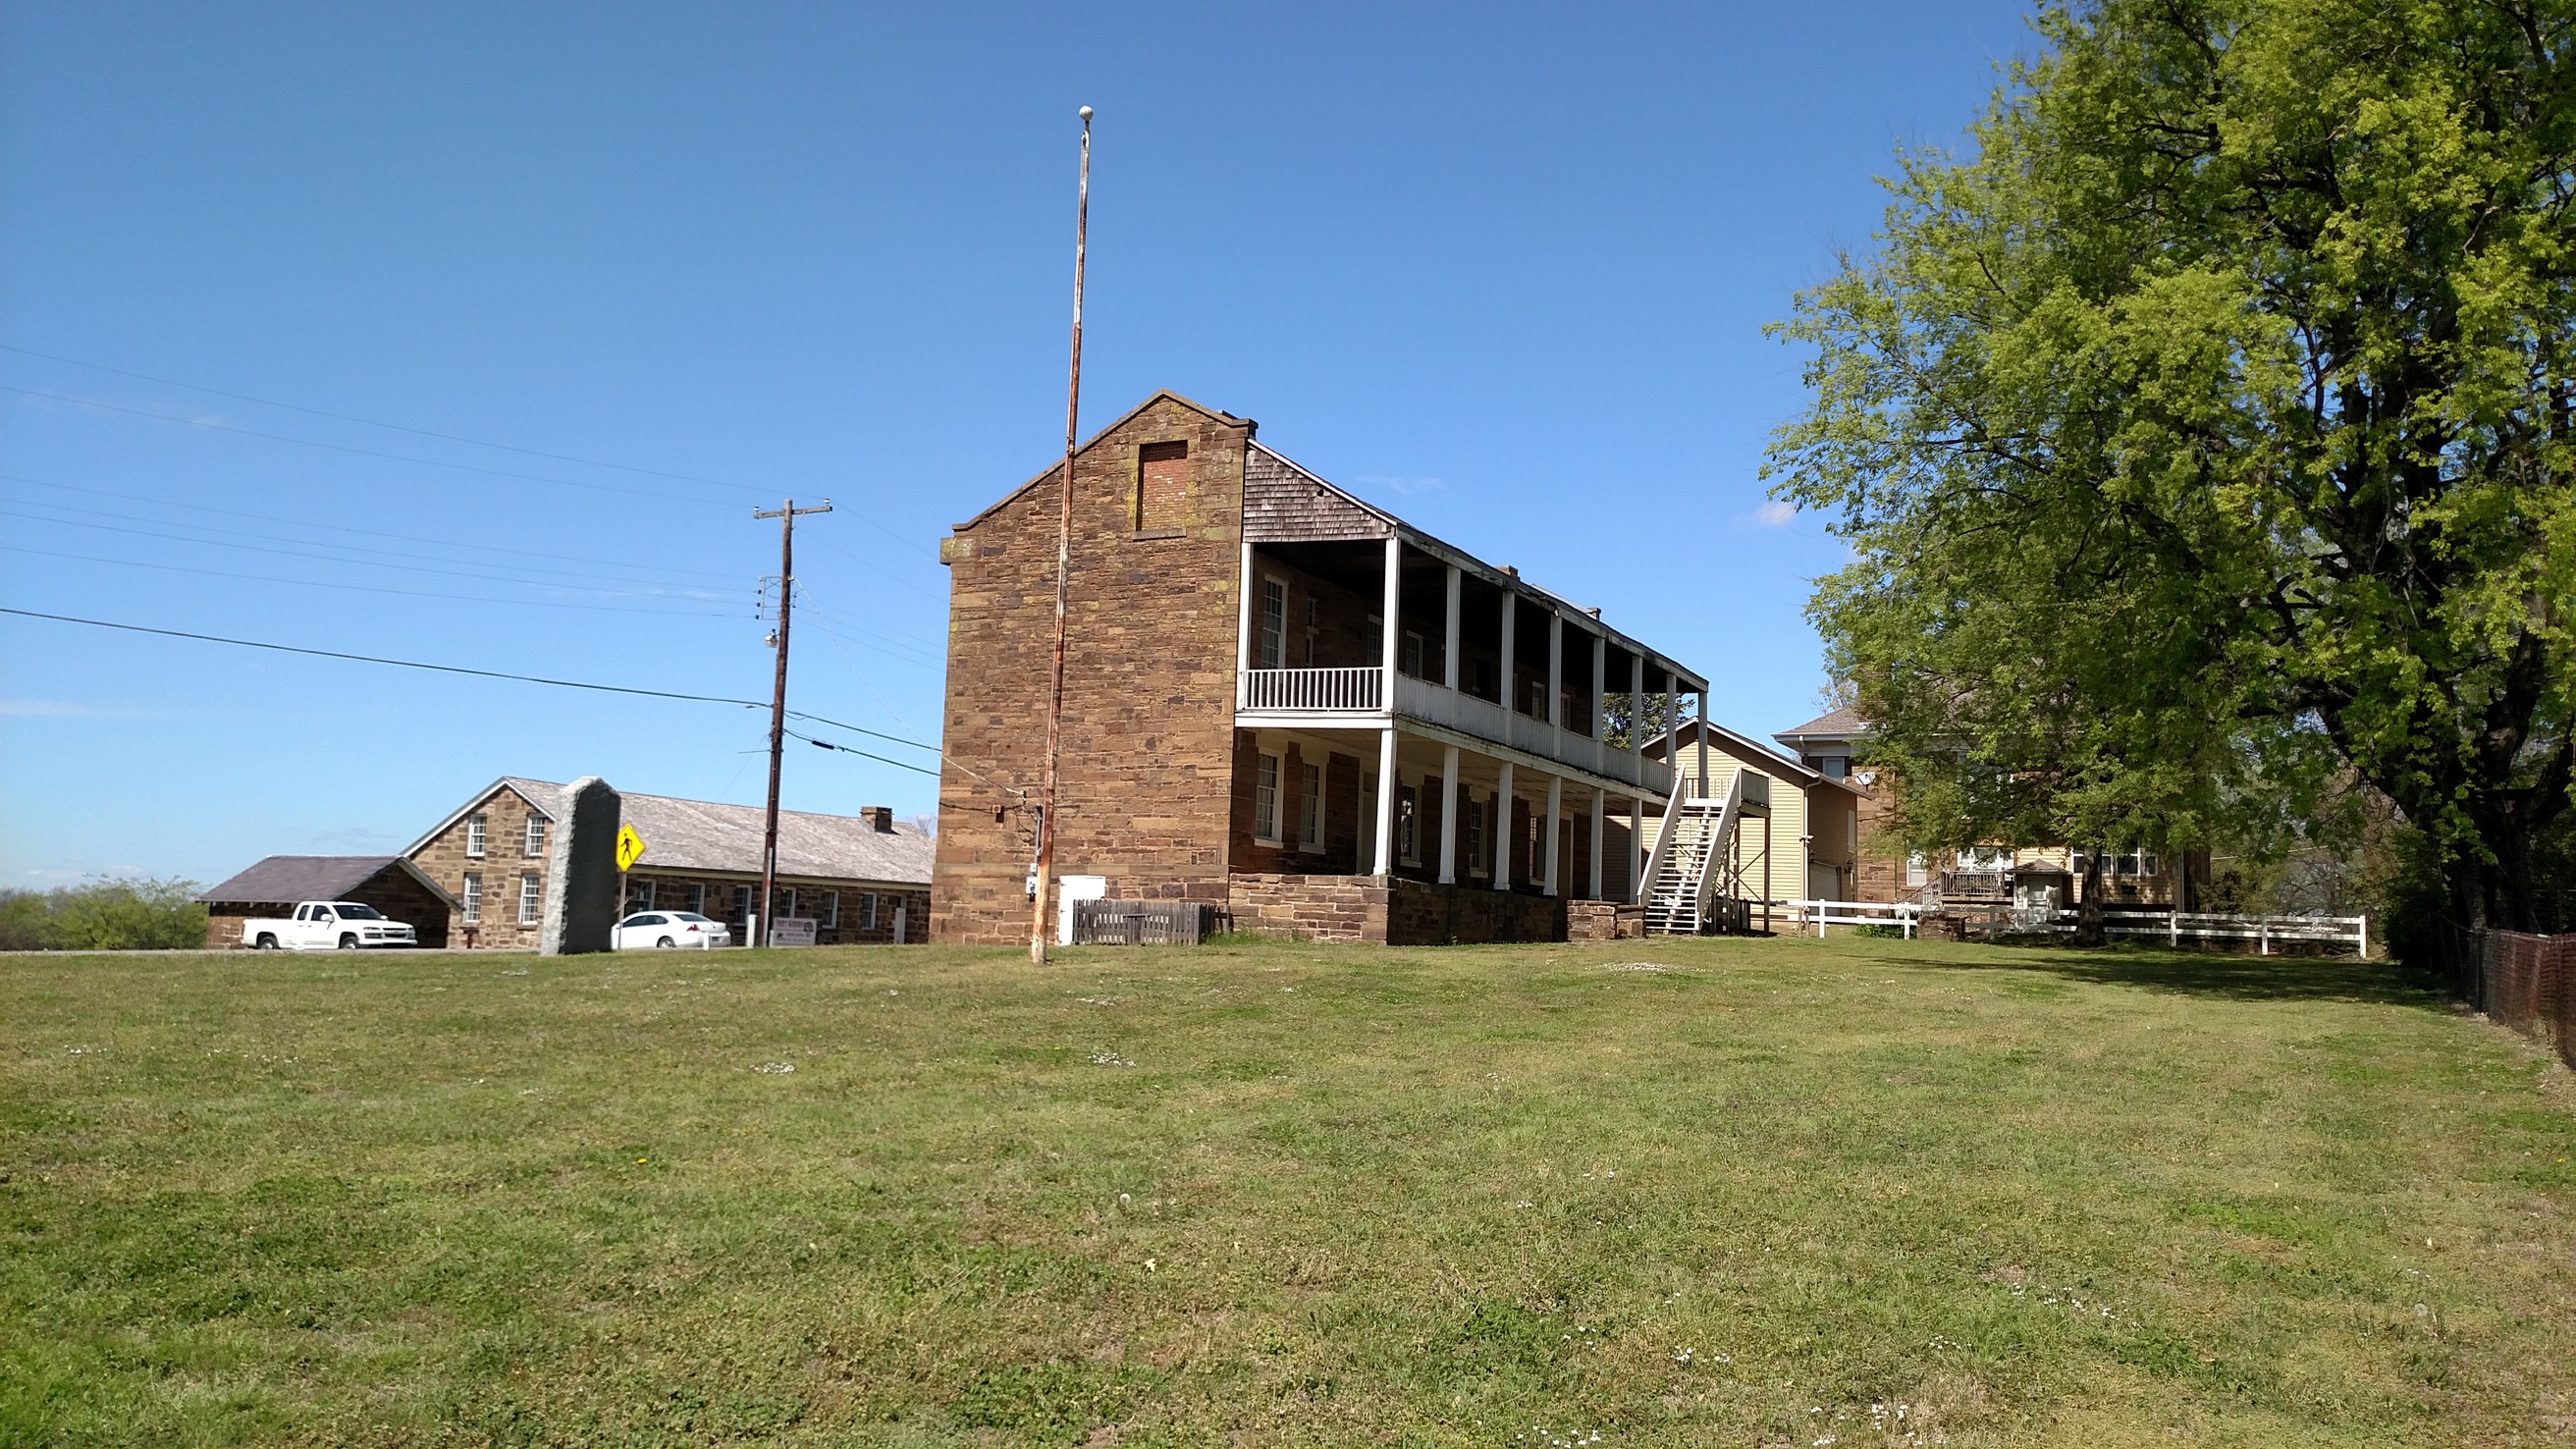 A view from the grounds of the Fort Gibson Historic Site Barracks in Fort Gibson, Oklahoma